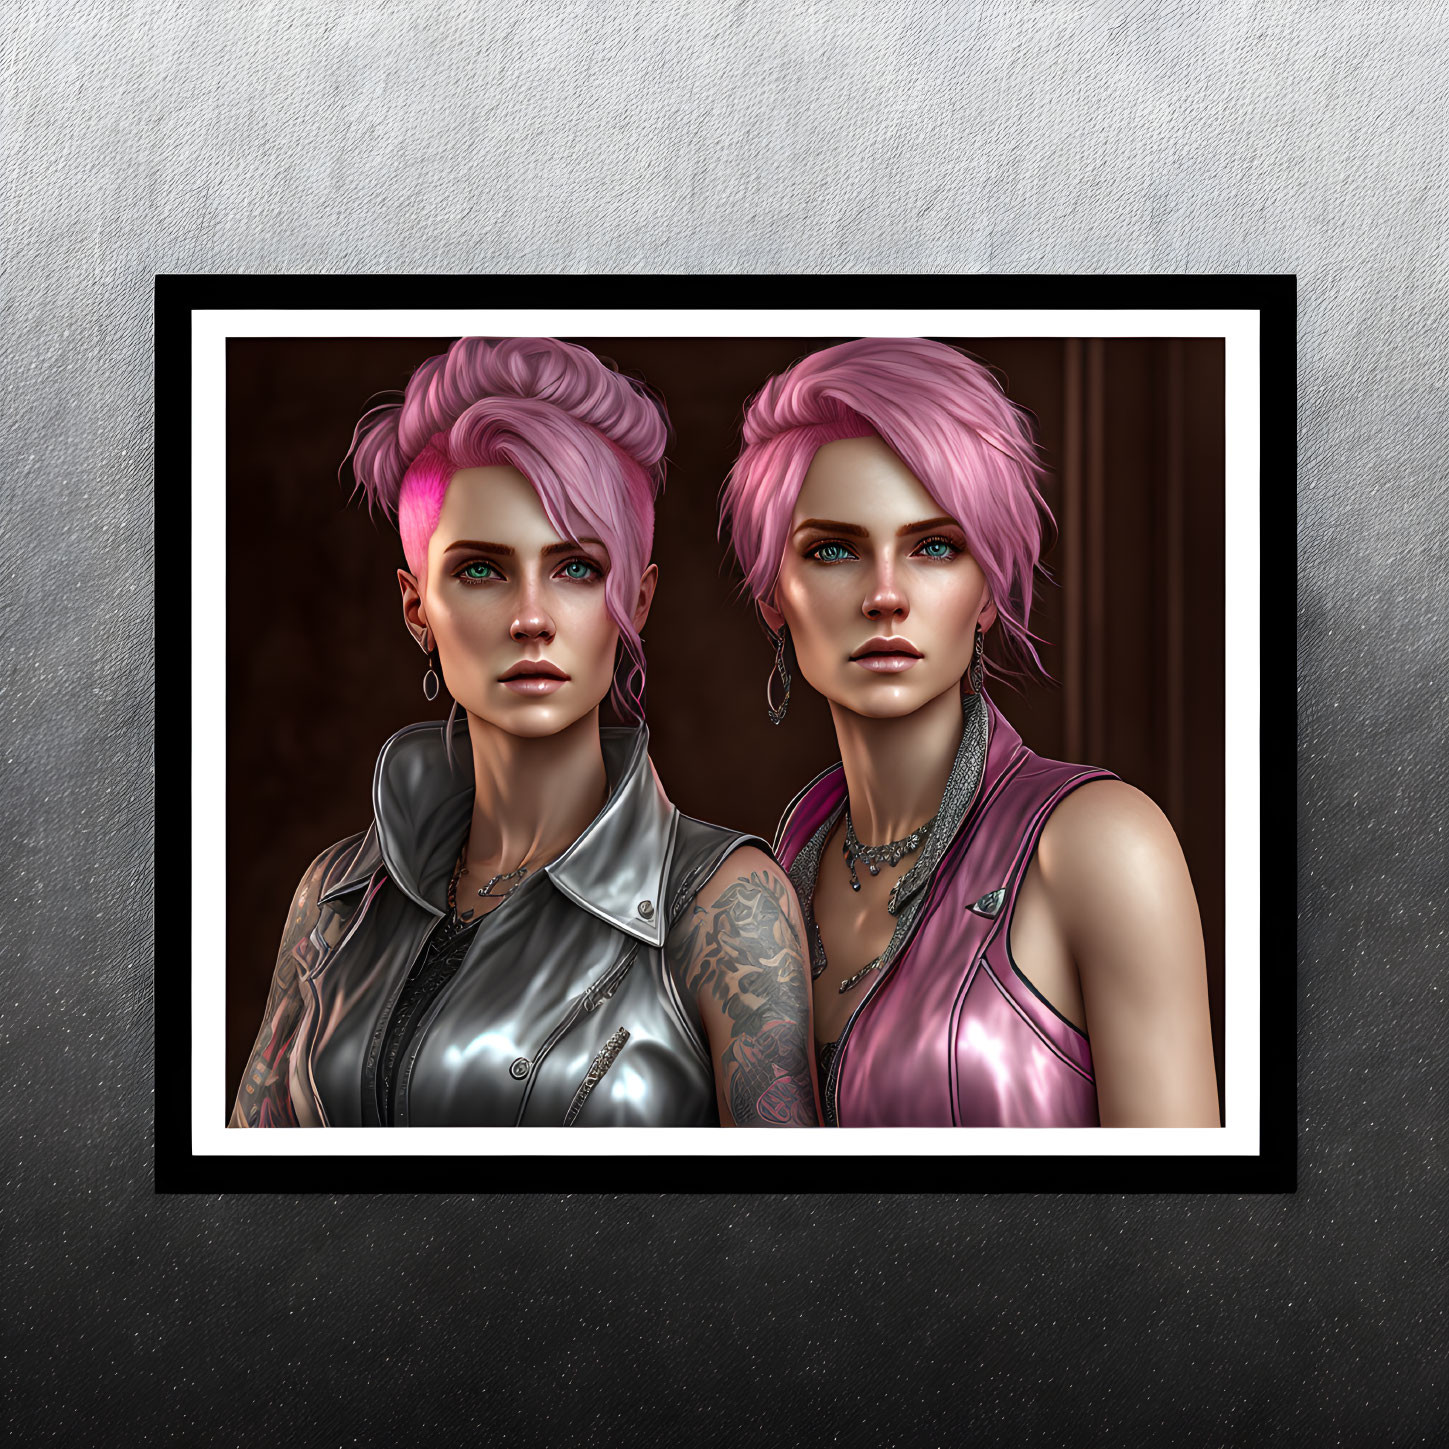 Digital illustration: Two characters with pink hair and tattoos in leather vests on textured wall